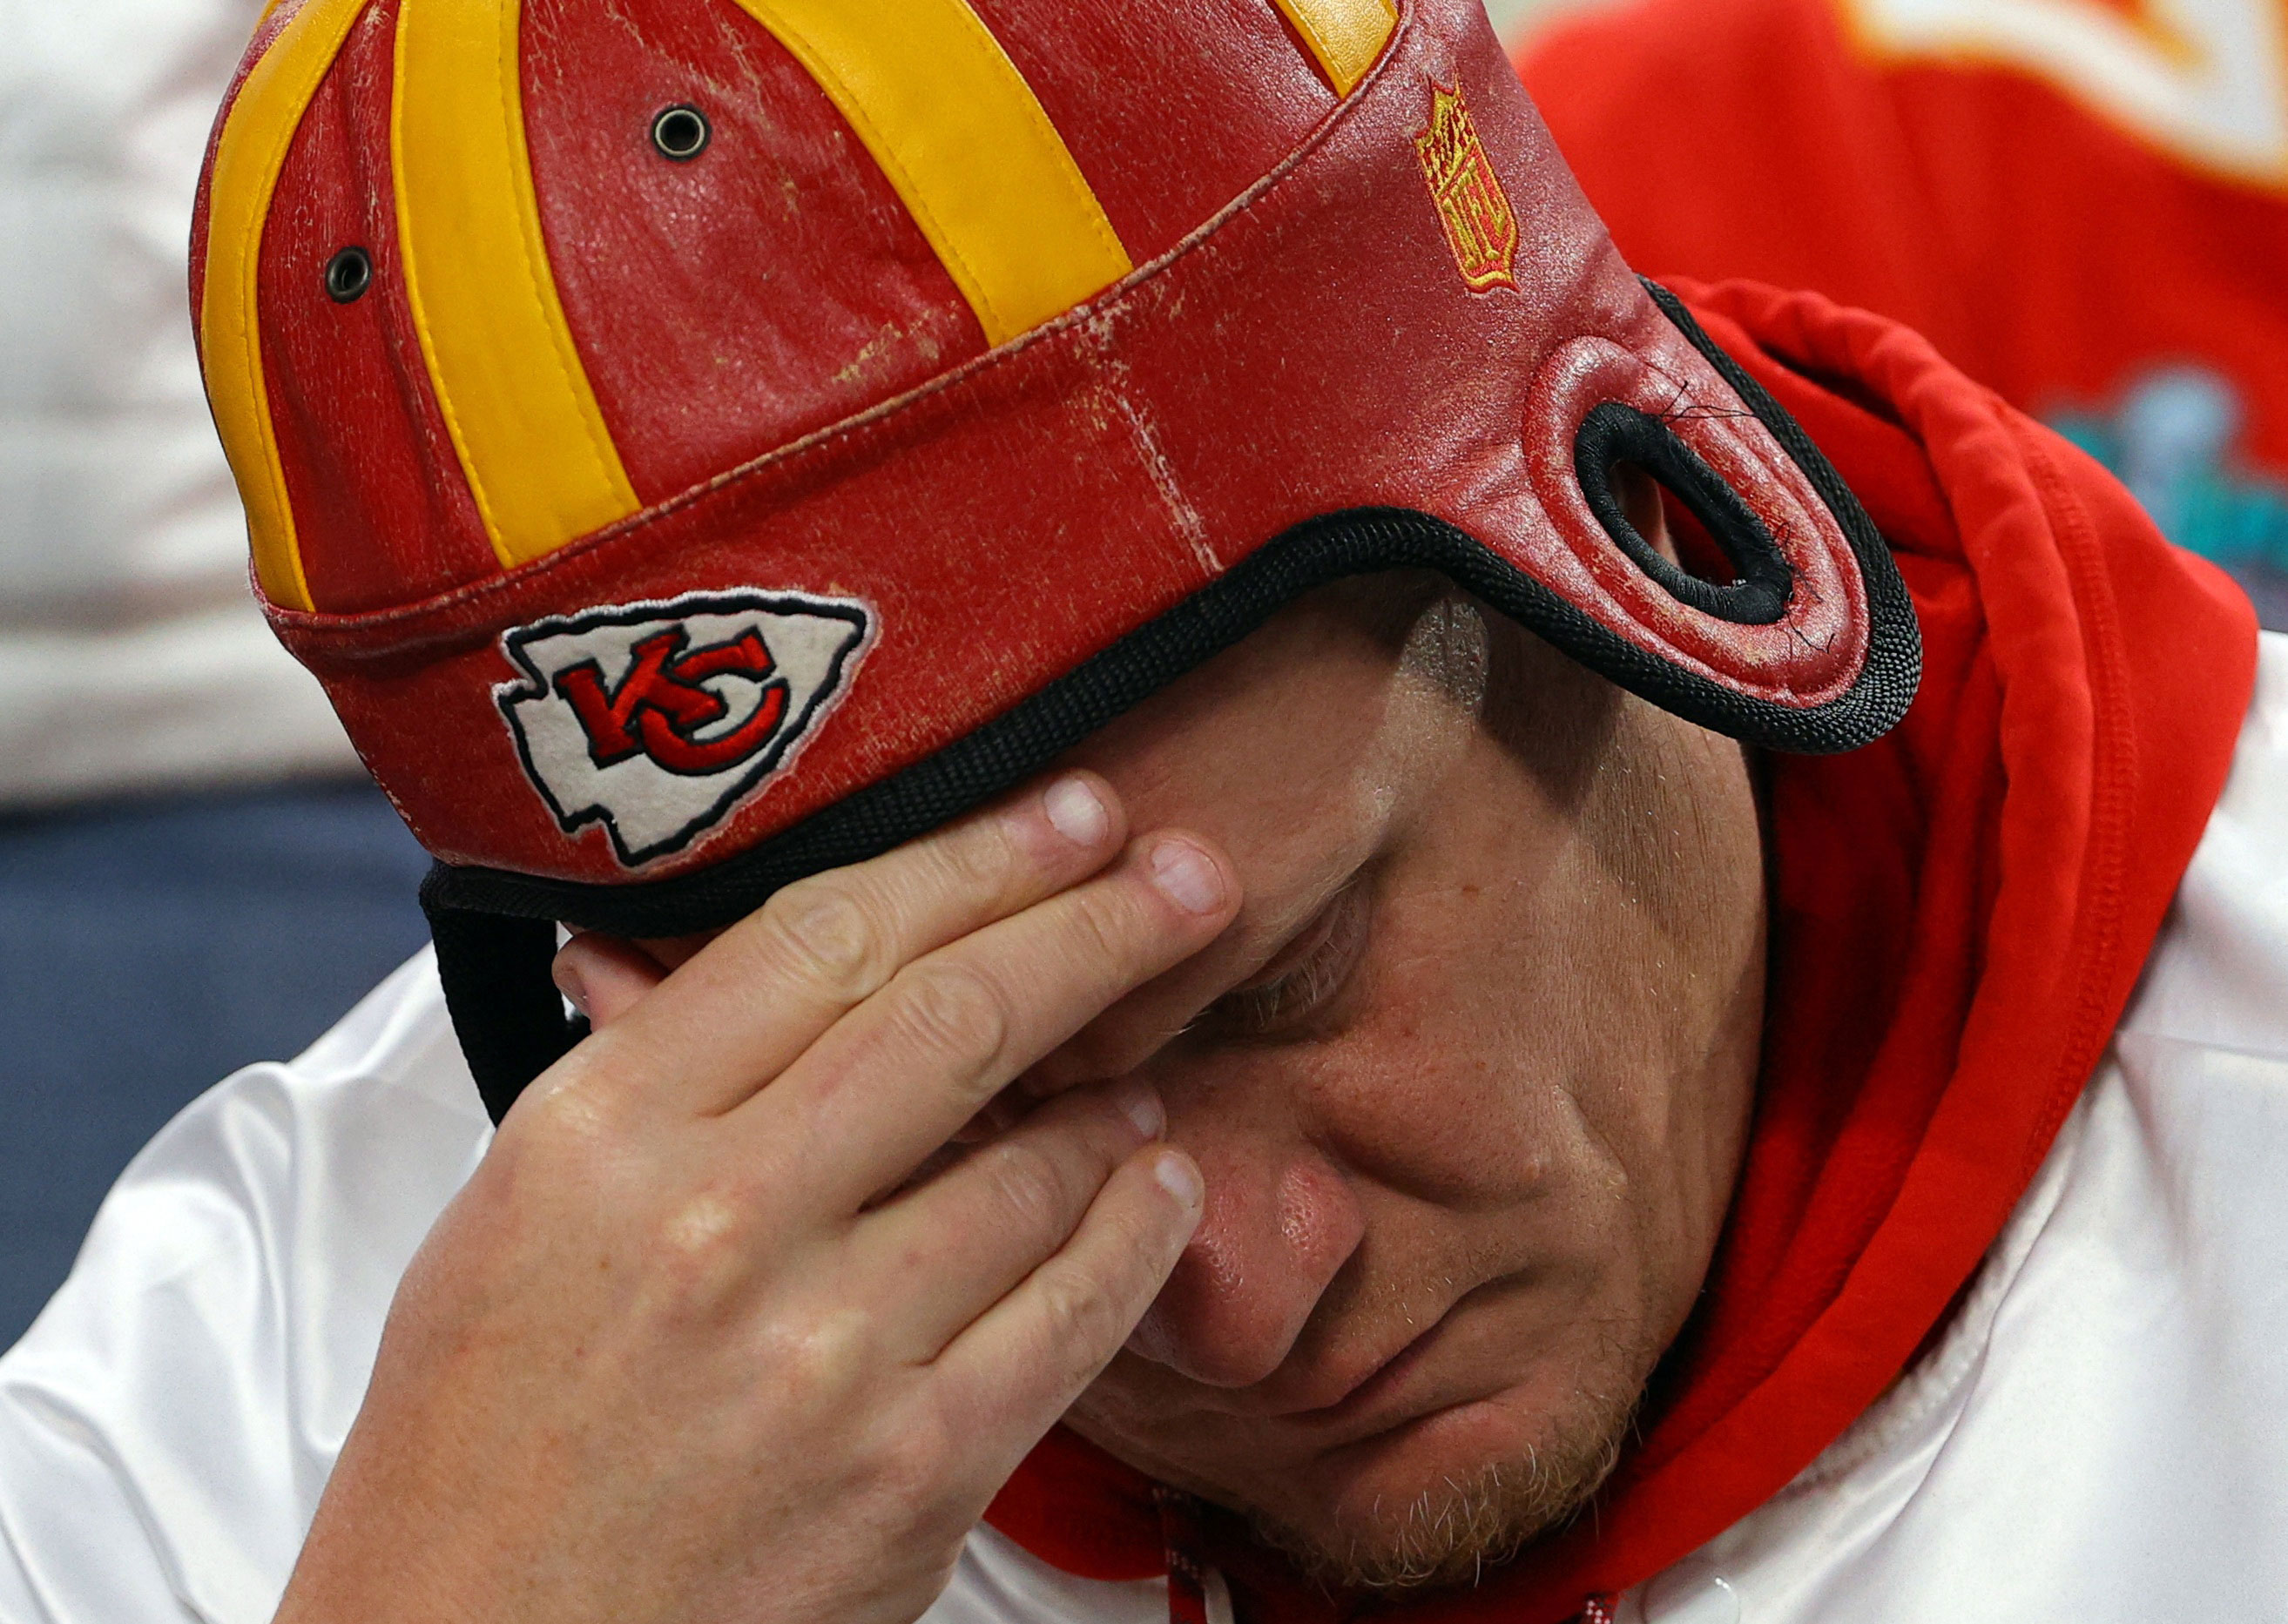 Kansas City Chiefs fan reacts to a play during the game.